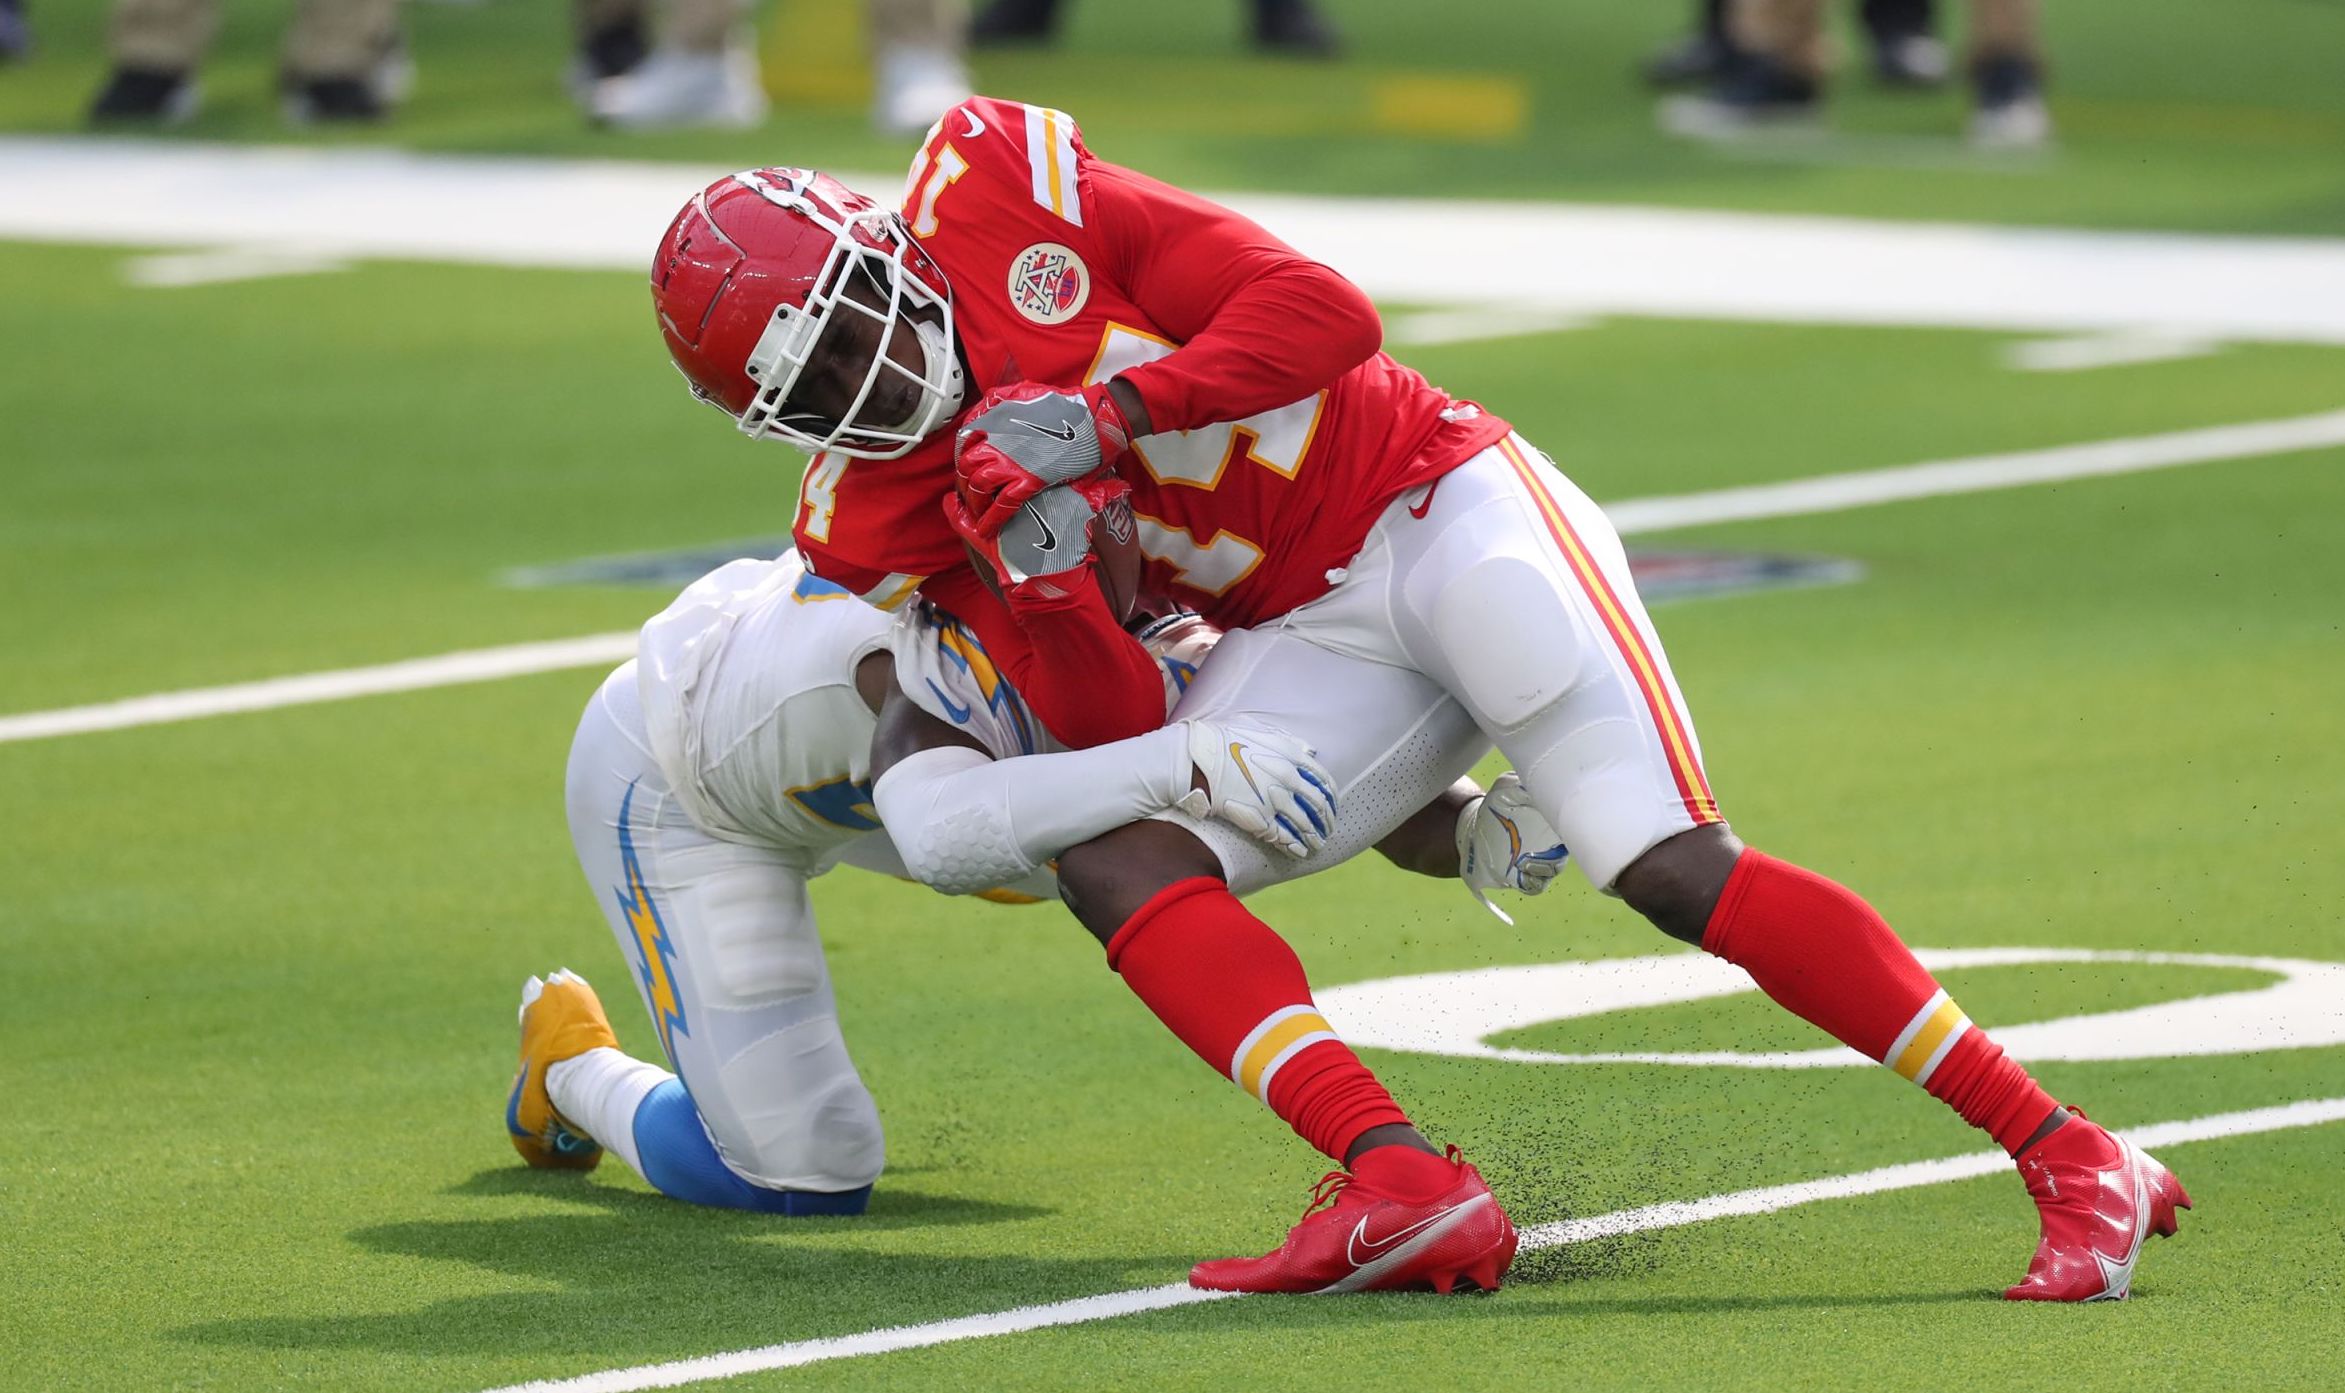 Sammy Watkins in Concussion Protocol as Chiefs Prepare for Ravens